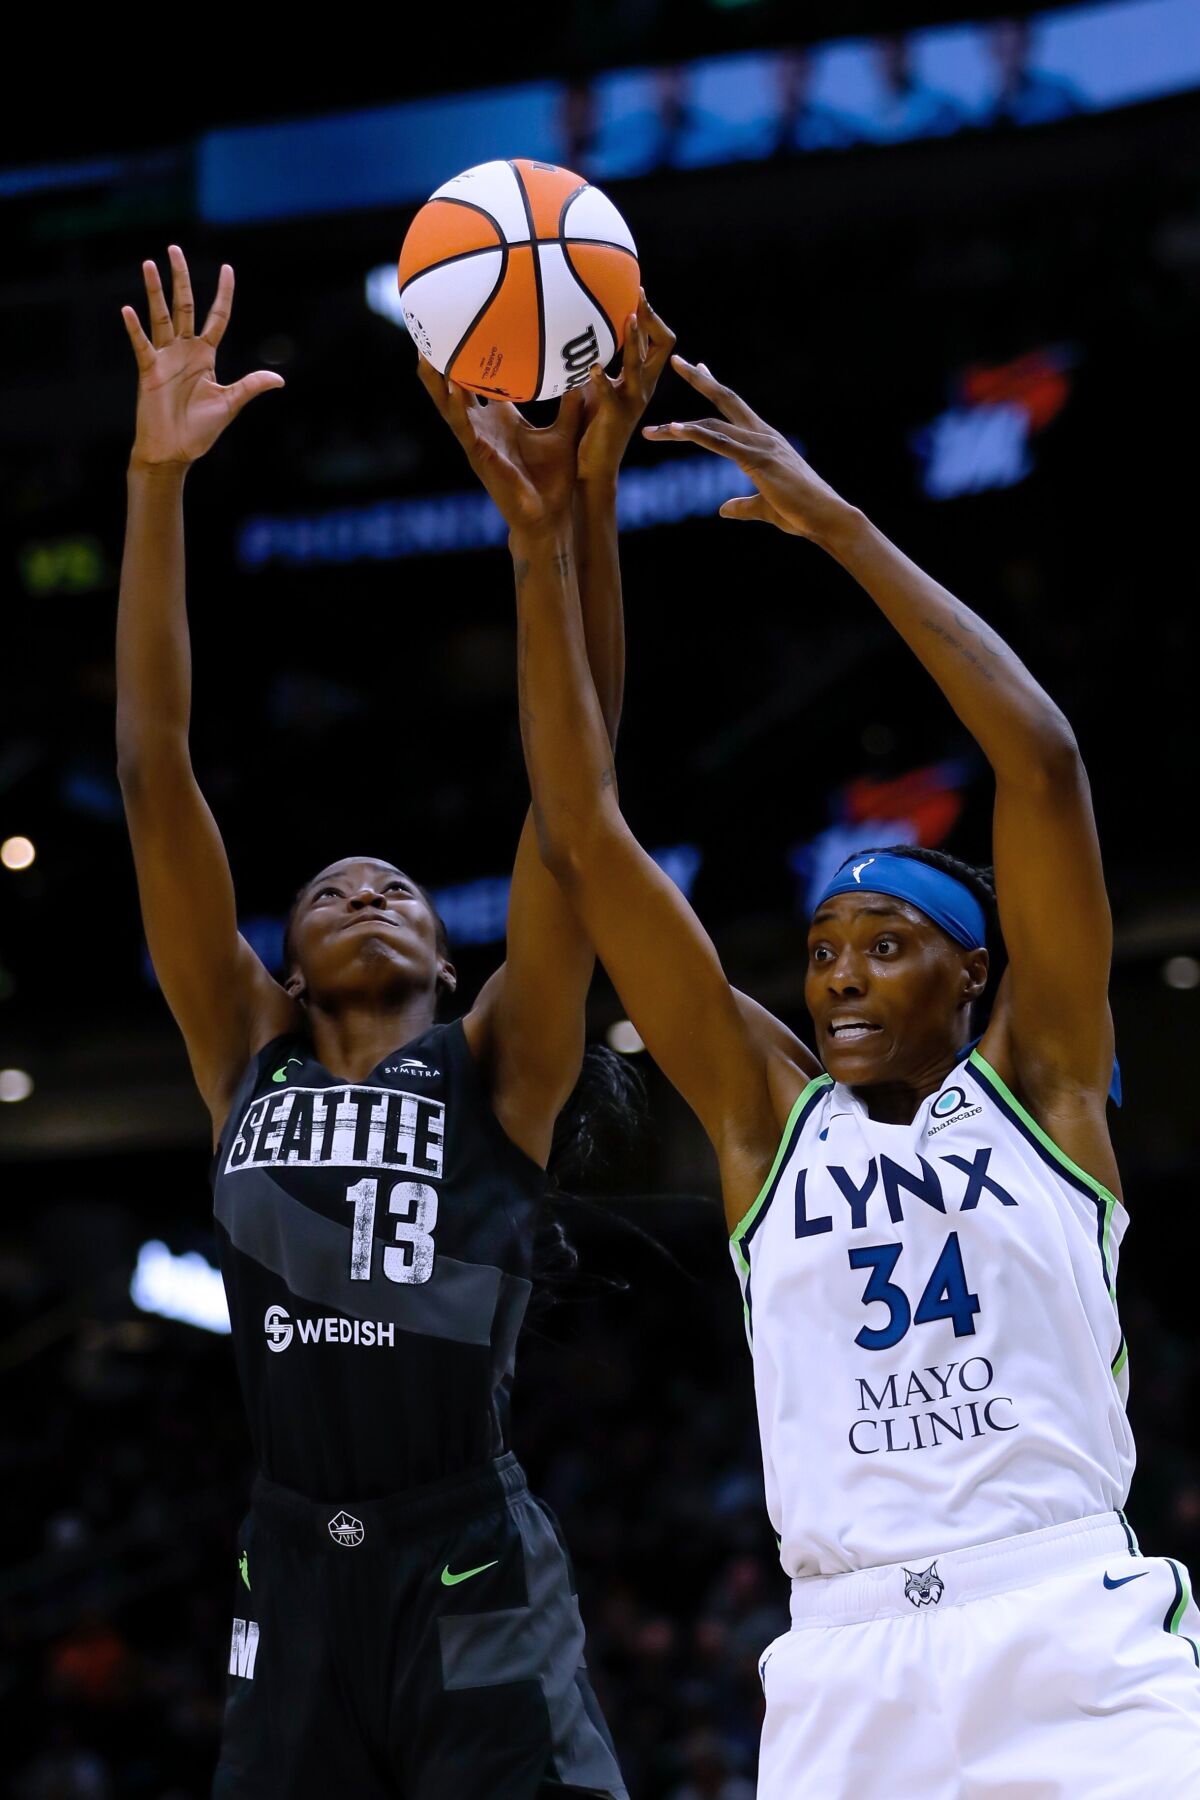 Seattle Storm center Ezi Magbegor vies for a rebound with Minnesota Lynx center Sylvia Fowles during the second quarter of a WNBA basketball game Friday, May 6, 2022, in Seattle. (Jennifer Buchanan/The Seattle Times via AP)